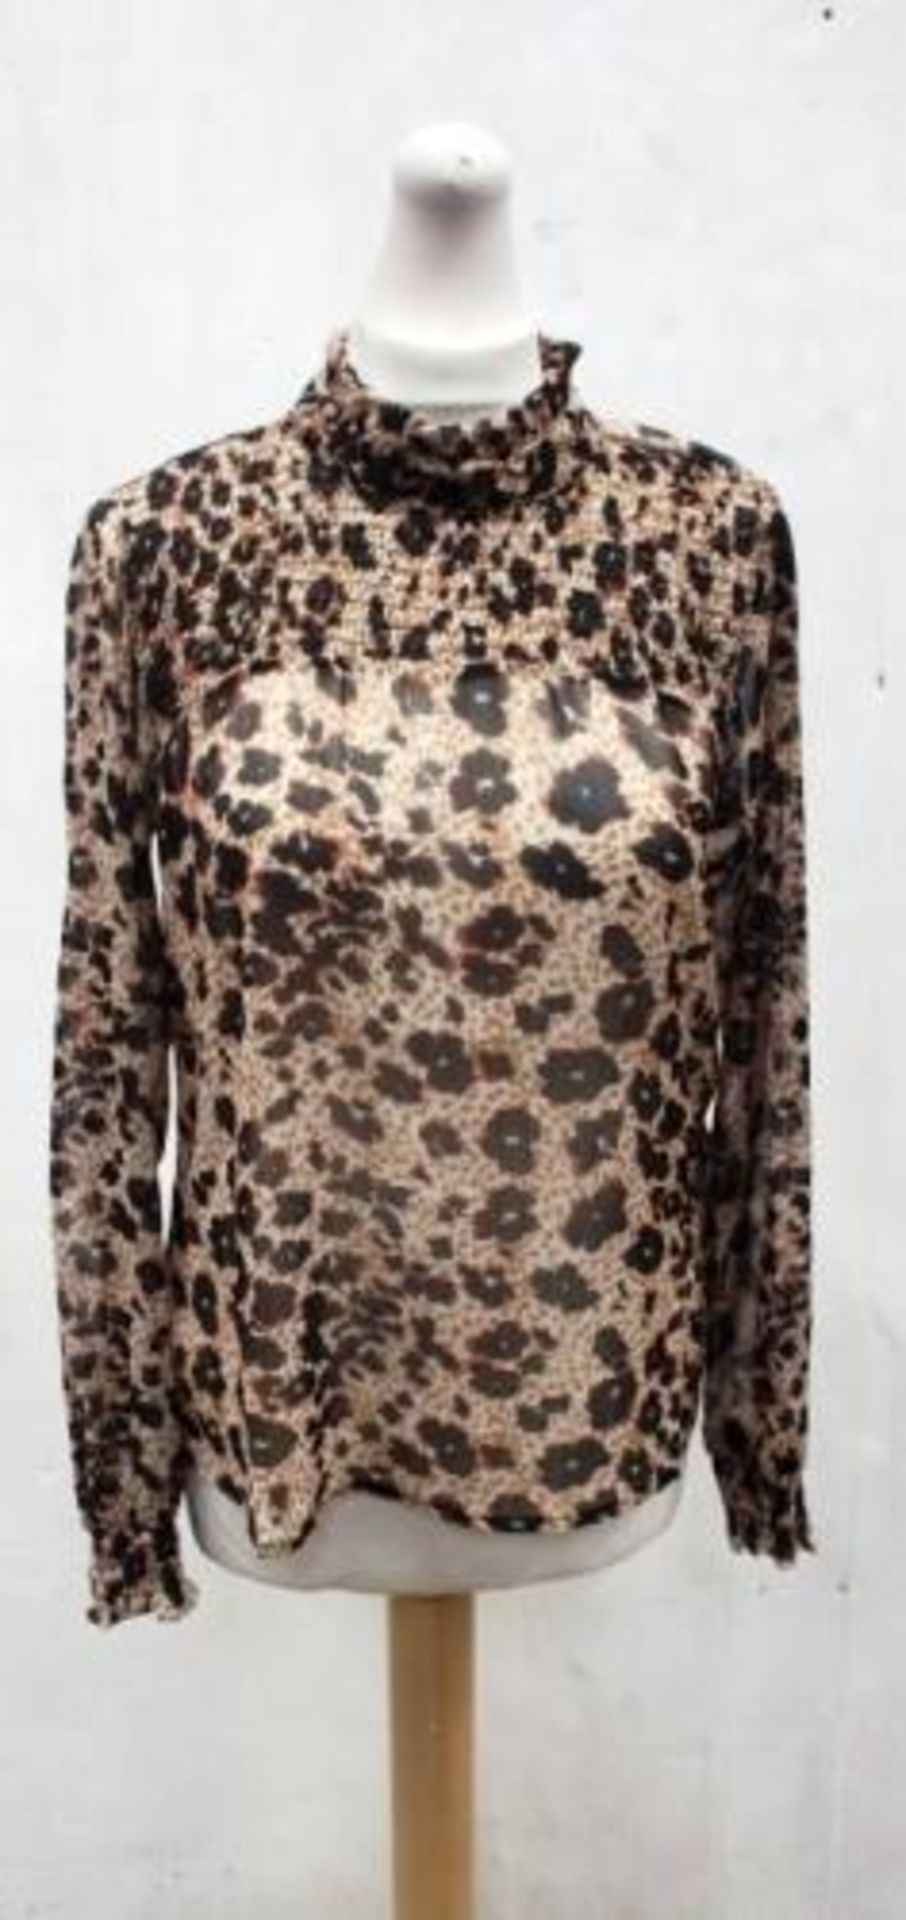 1 x Damsel in a Dress multicolour vanity animal blouse, size 12, RRP £99.00 - New with tags (ES15) - Image 2 of 2